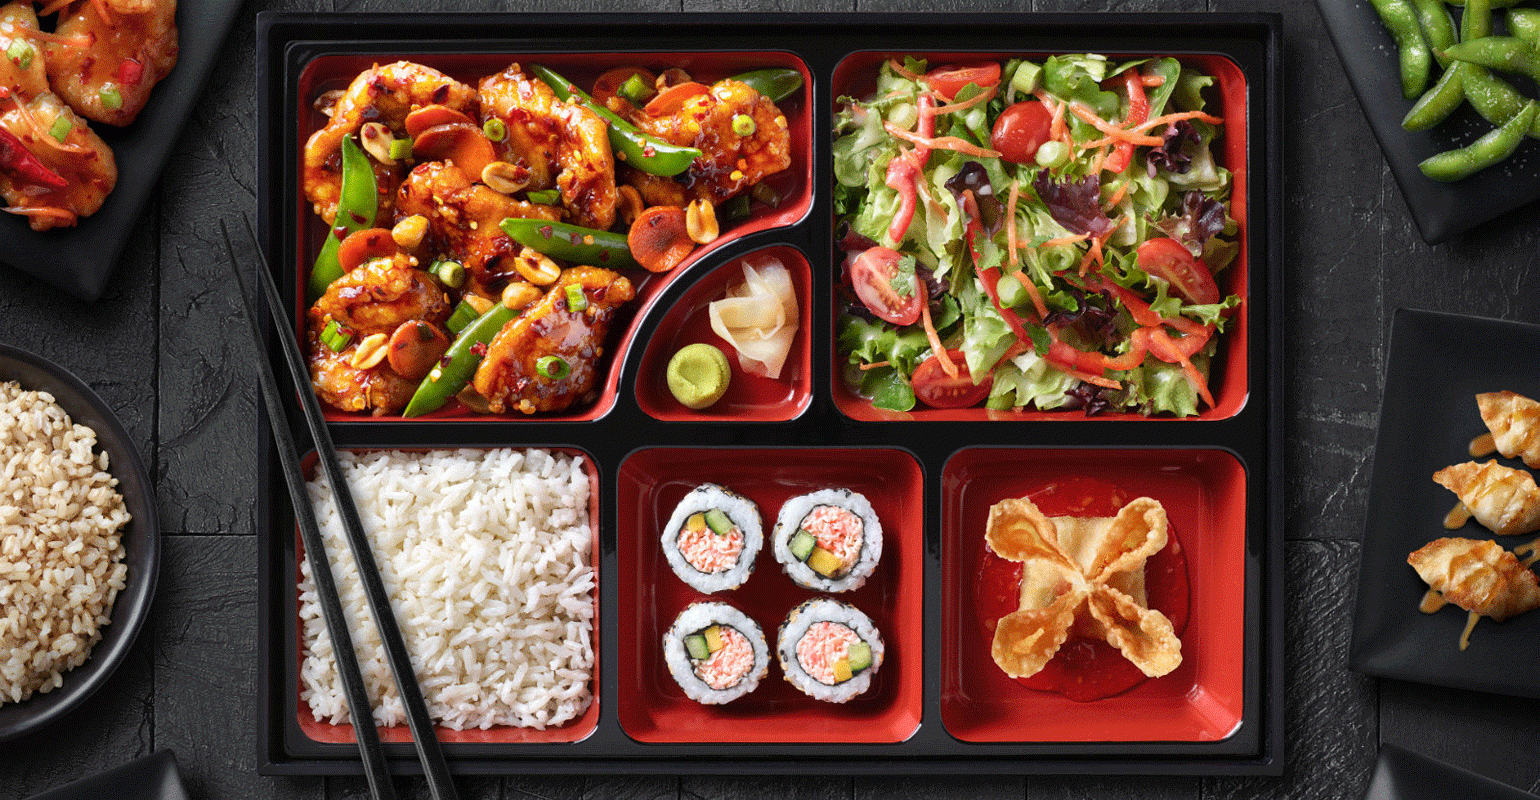 methaan jungle Cadeau Bento boxes are trending in fast casual | Restaurant Hospitality